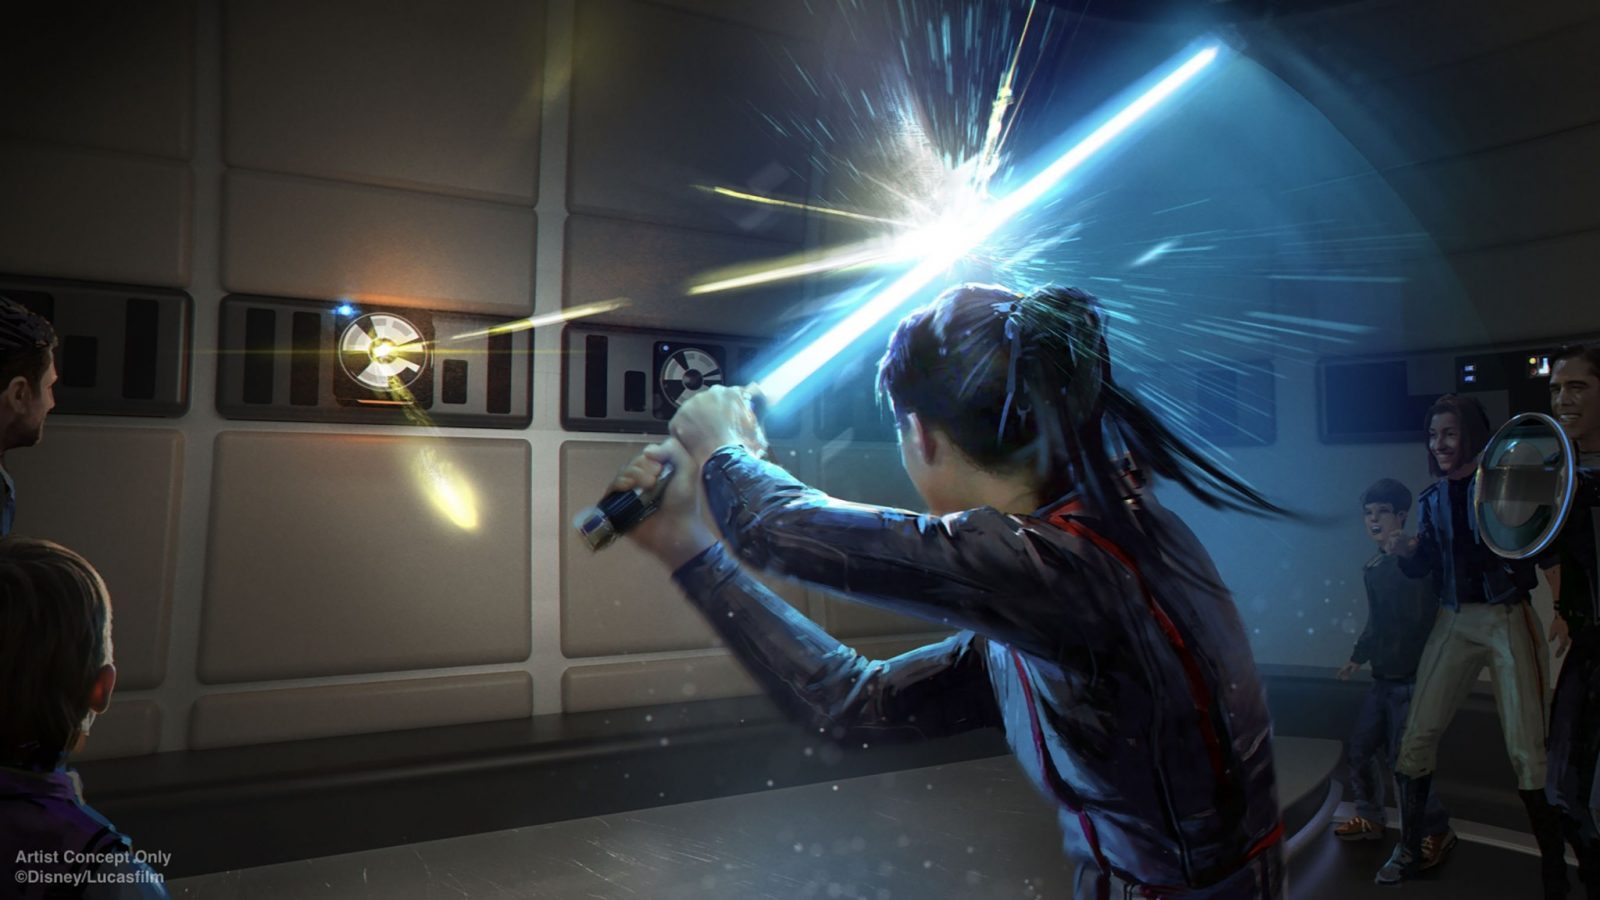 artist rendition of a girl wielding a lightsaber onboard the Halycon of the Disney Star Wars Hotel